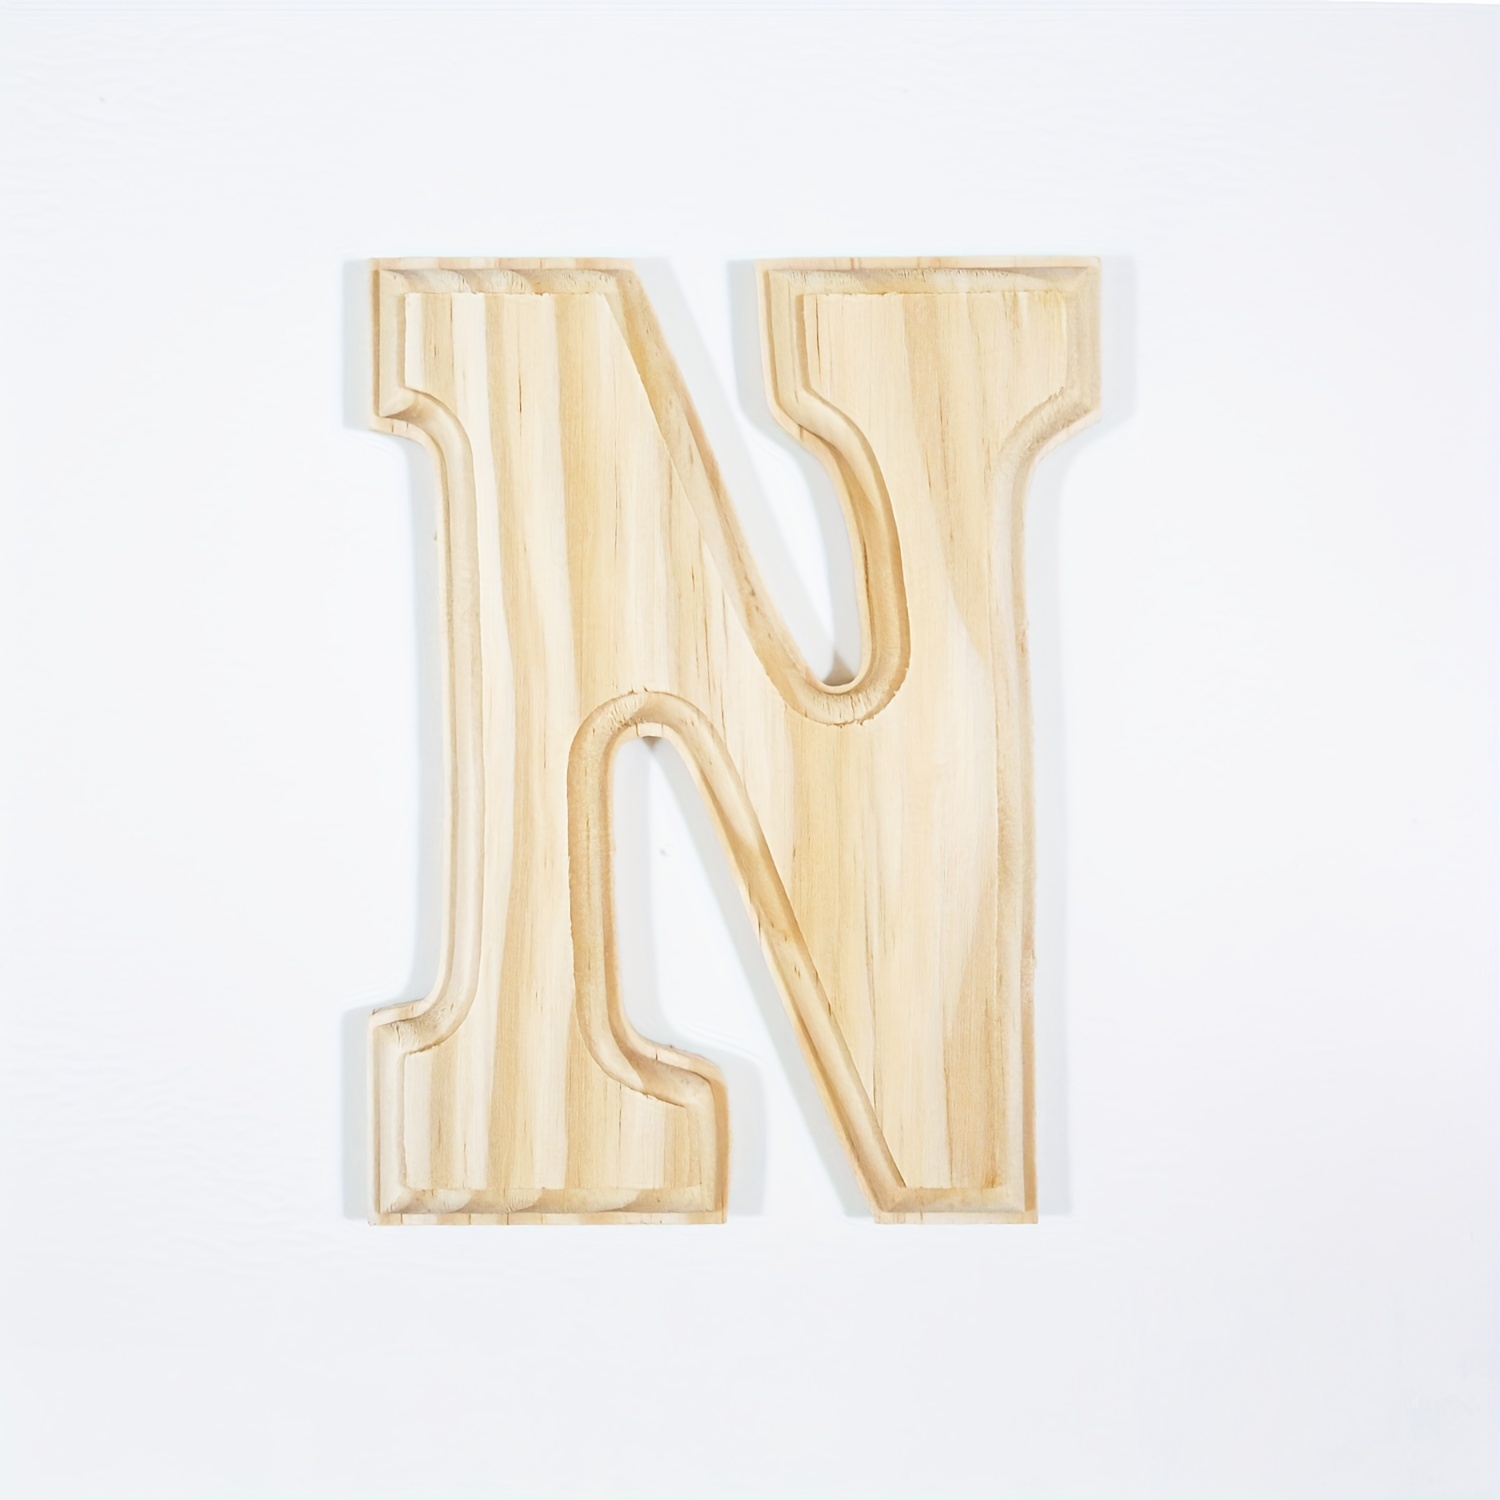 6 Inch Wooden Letters -  Canada